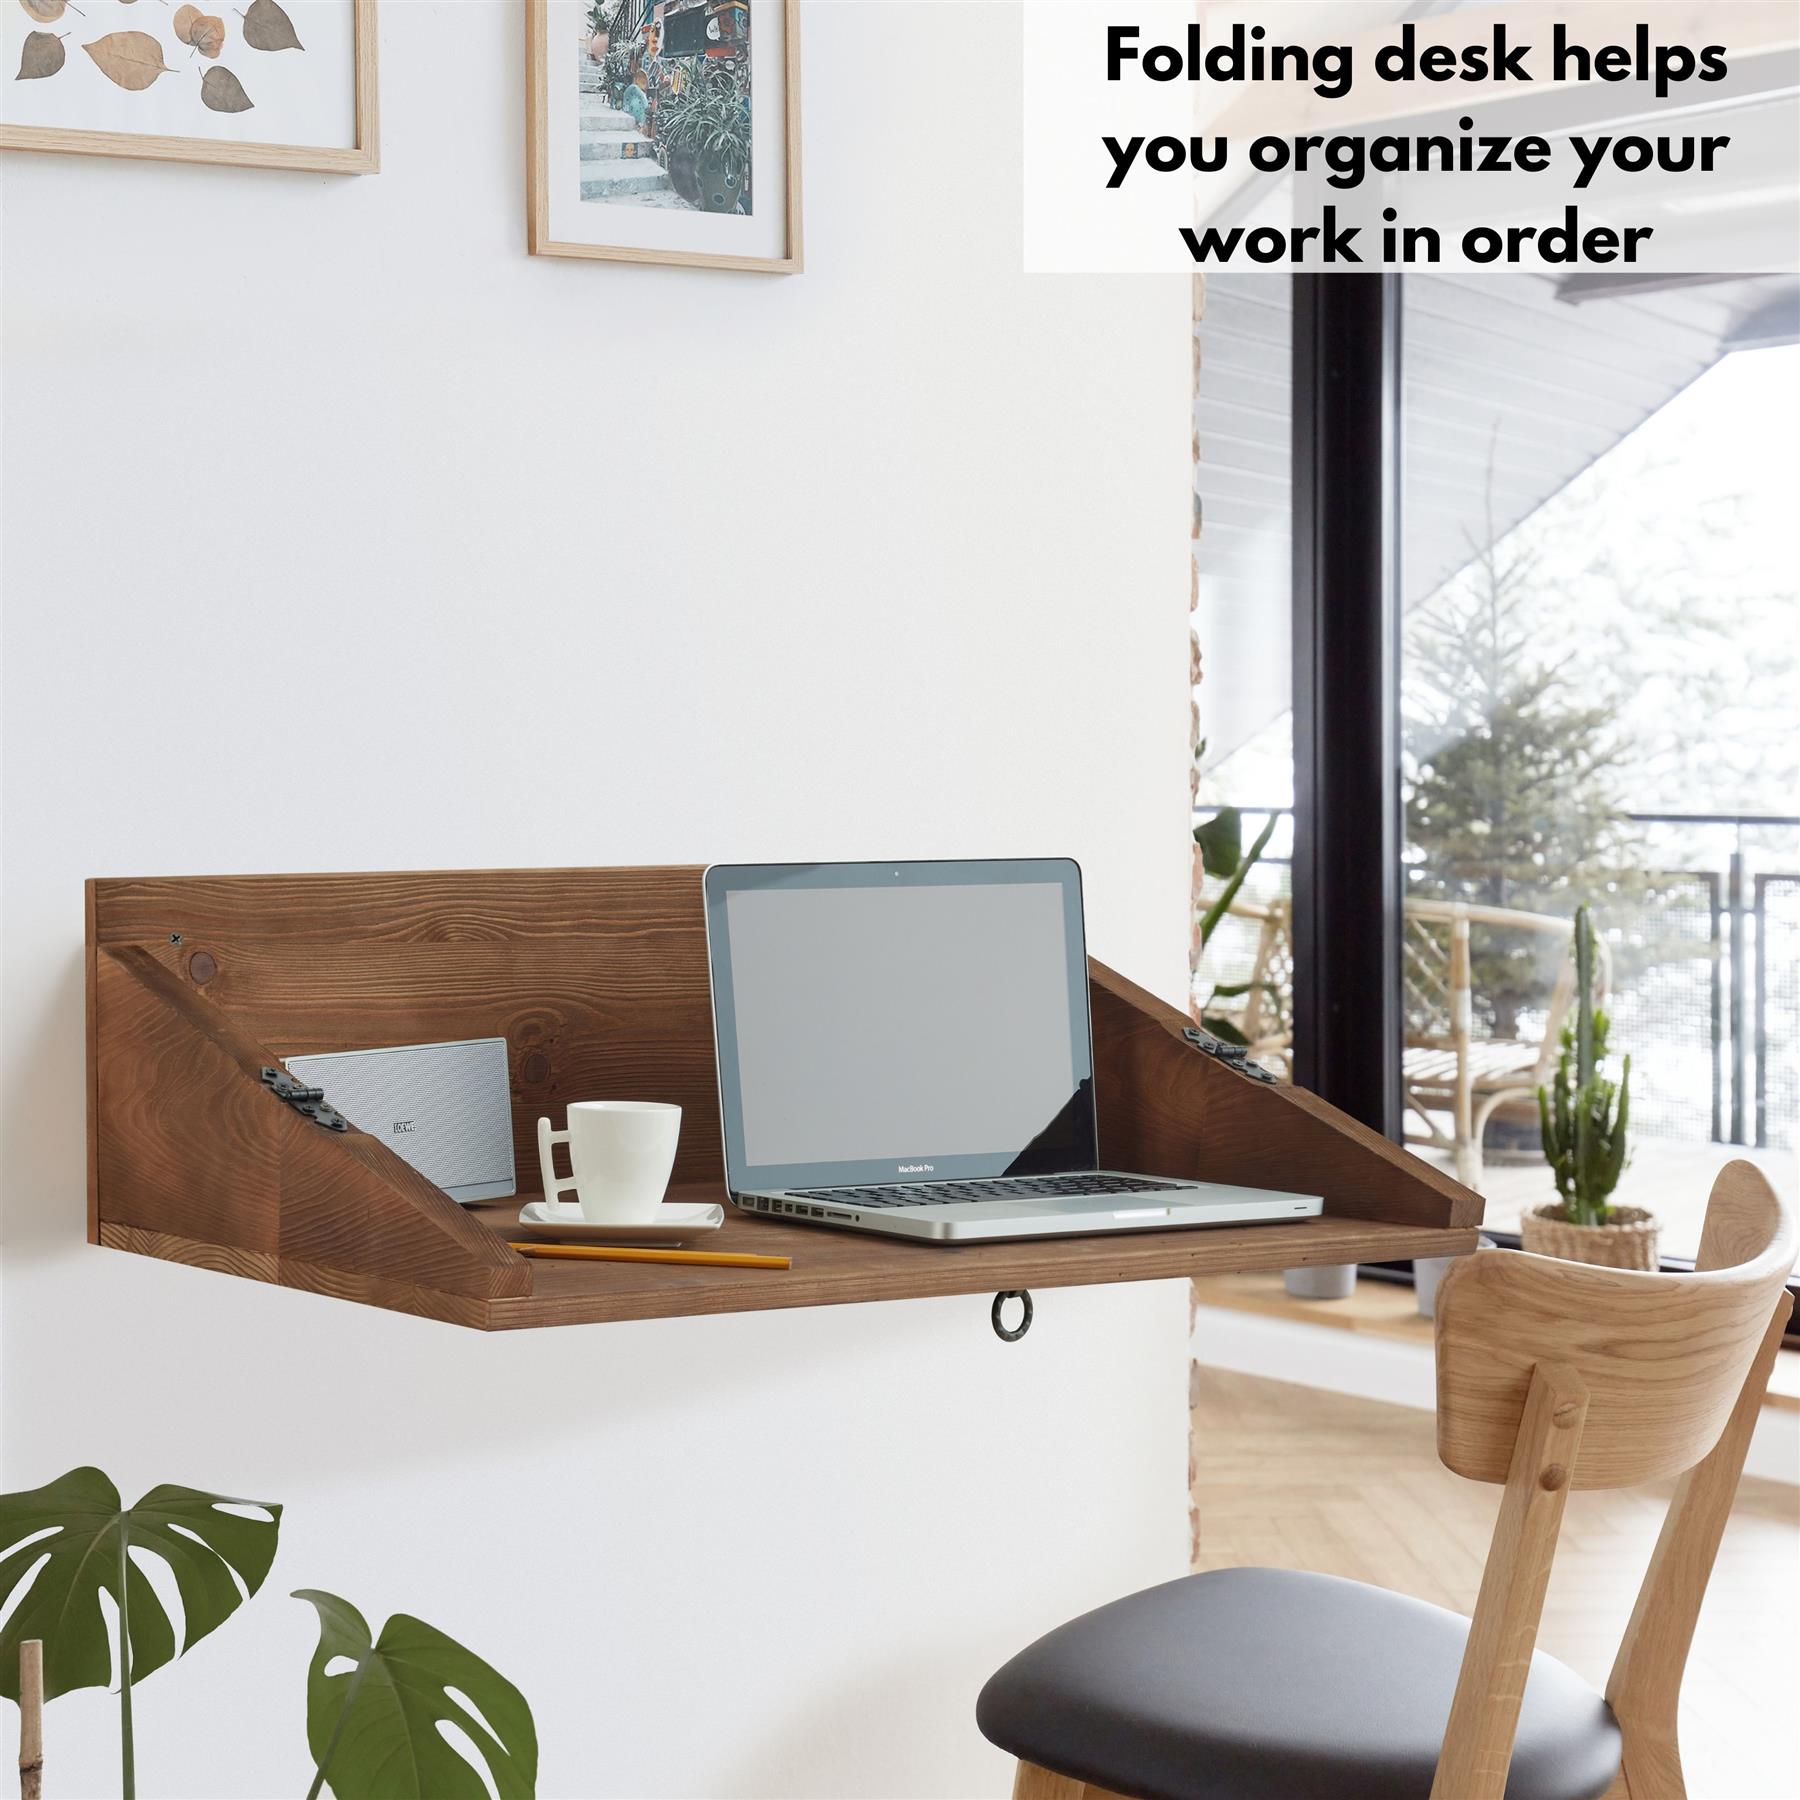 Wall Mounted Desk Brown (23.5x79x48 cm) Home Office Workspace | Space-saving And Functional Design Wooden Working Fold Away Desk